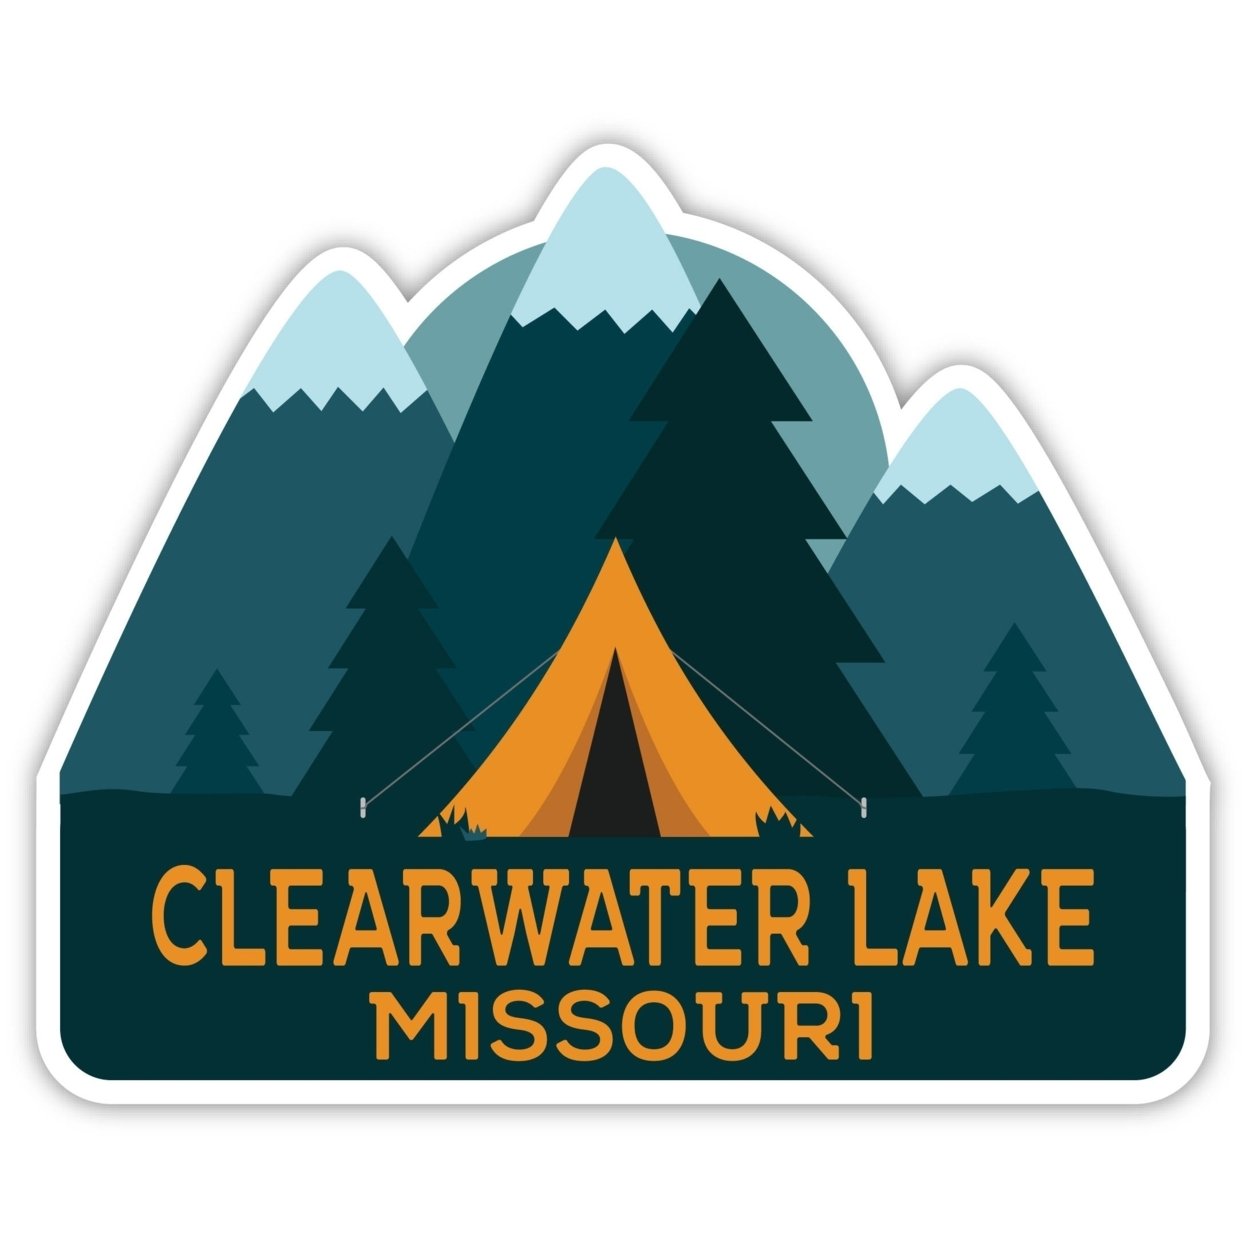 Clearwater Lake Missouri Souvenir Decorative Stickers (Choose Theme And Size) - 4-Pack, 2-Inch, Tent